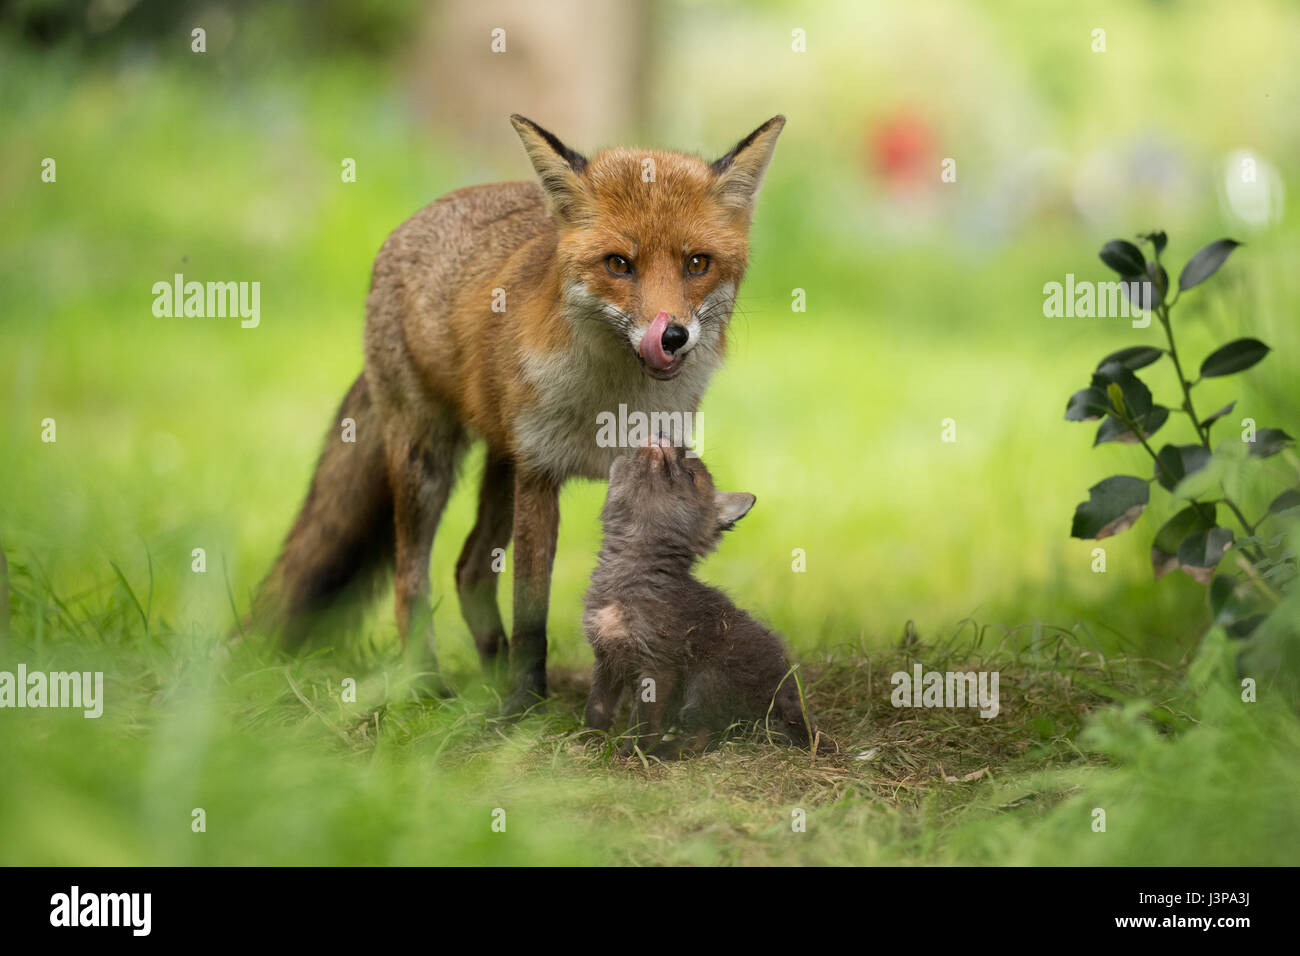 A very young fox cub looking up lovingly at its mother Stock Photo